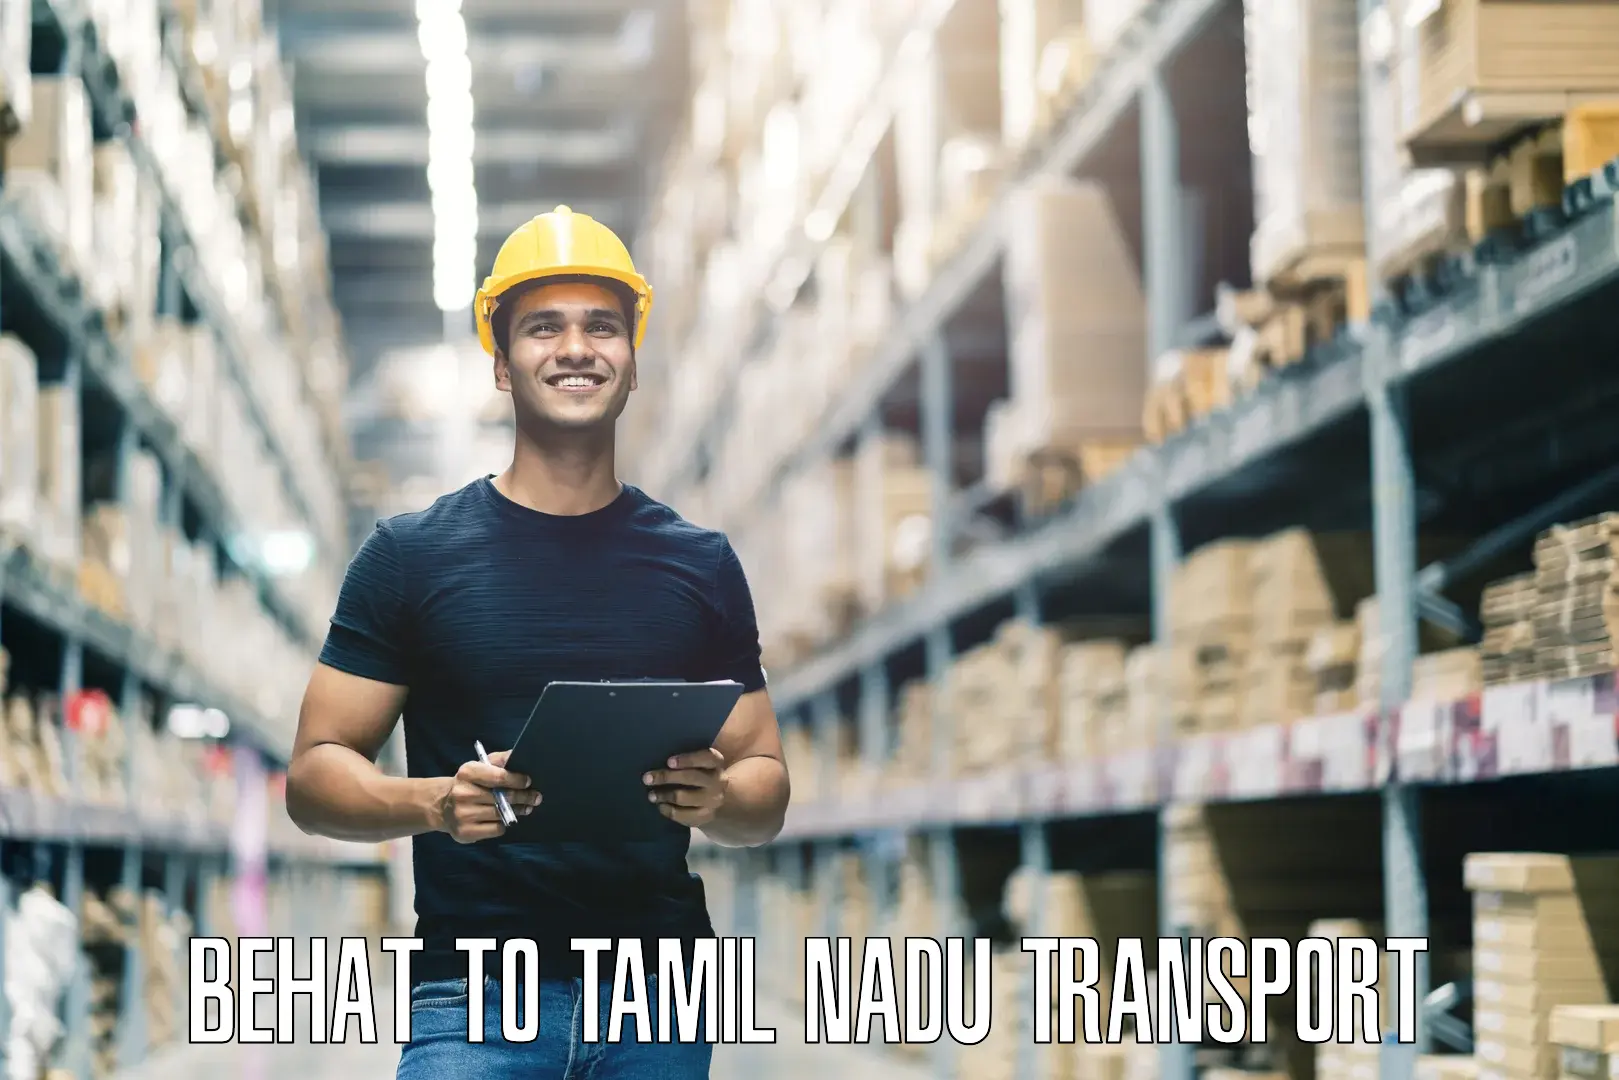 Nearby transport service in Behat to Tamil Nadu